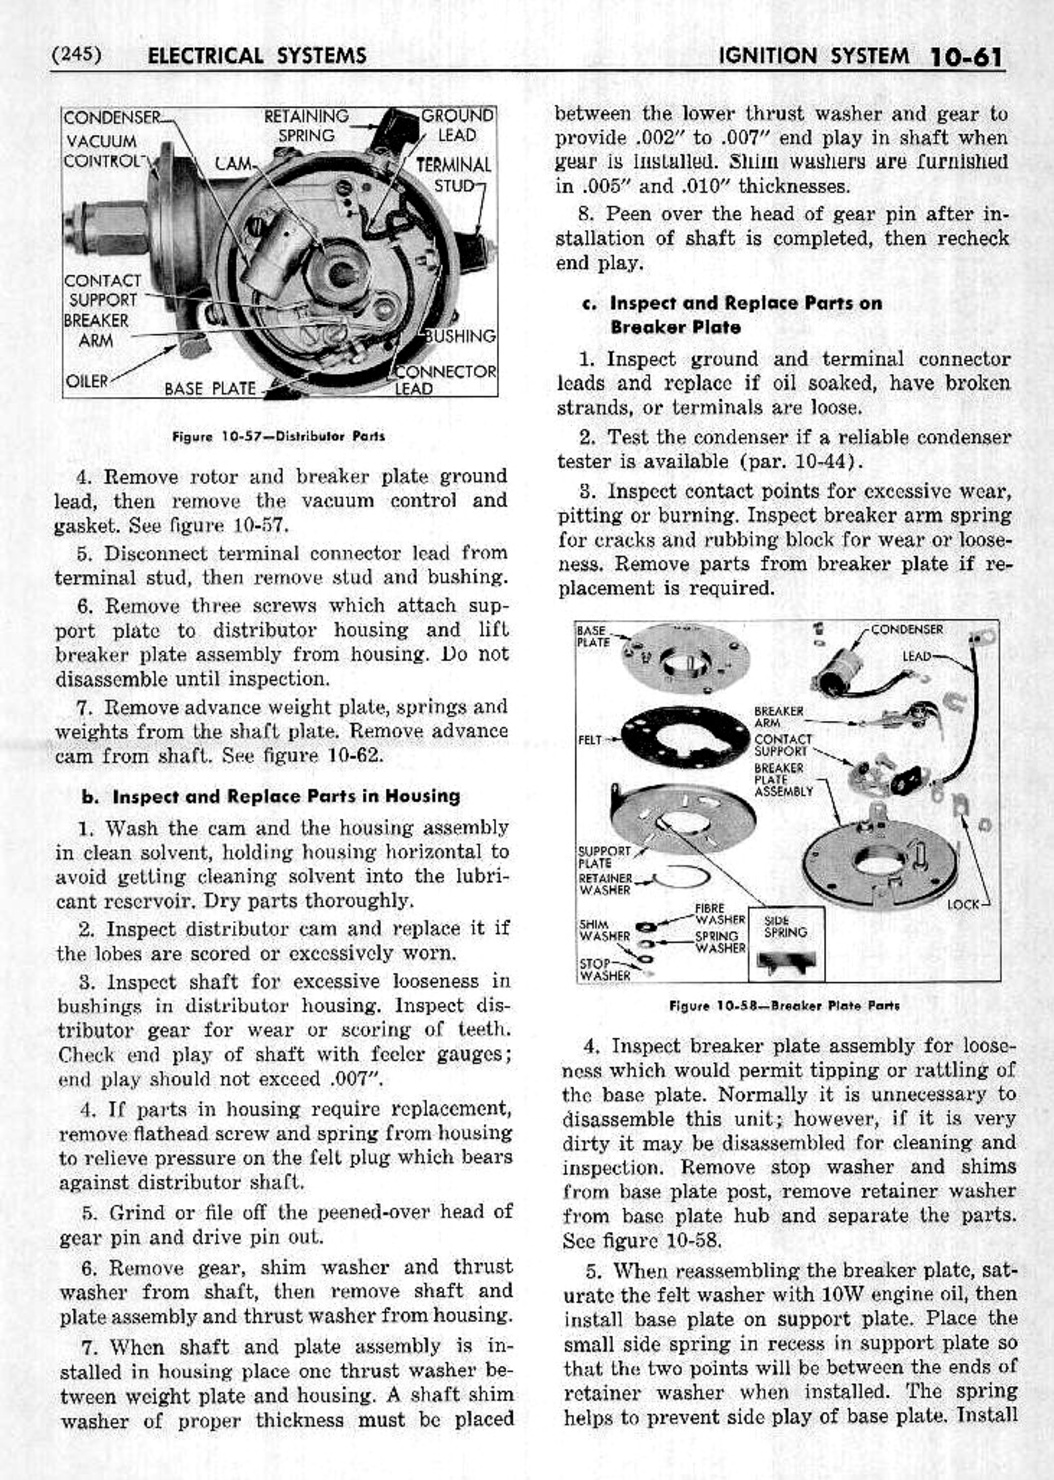 n_11 1953 Buick Shop Manual - Electrical Systems-061-061.jpg